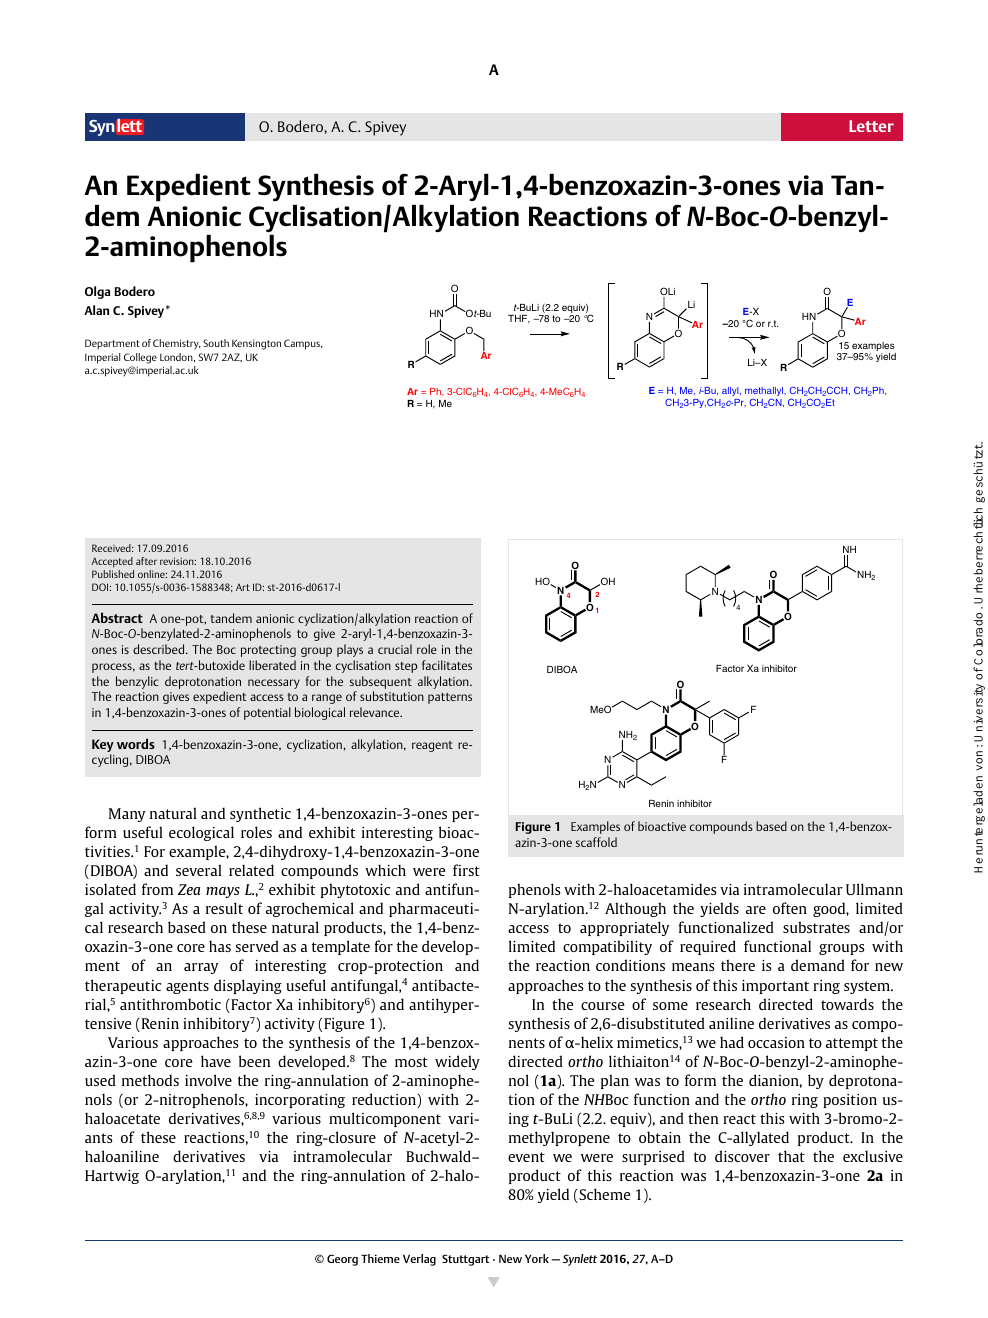 An Expedient Synthesis Of 2 Aryl 1 4 Benzoxazin 3 Ones Via Tandem Anionic Cyclisation Alkylation Reactions Of N Boc O Benzyl 2 Aminophenols Topic Of Research Paper In Chemical Sciences Download Scholarly Article Pdf And Read For Free On Cyberleninka